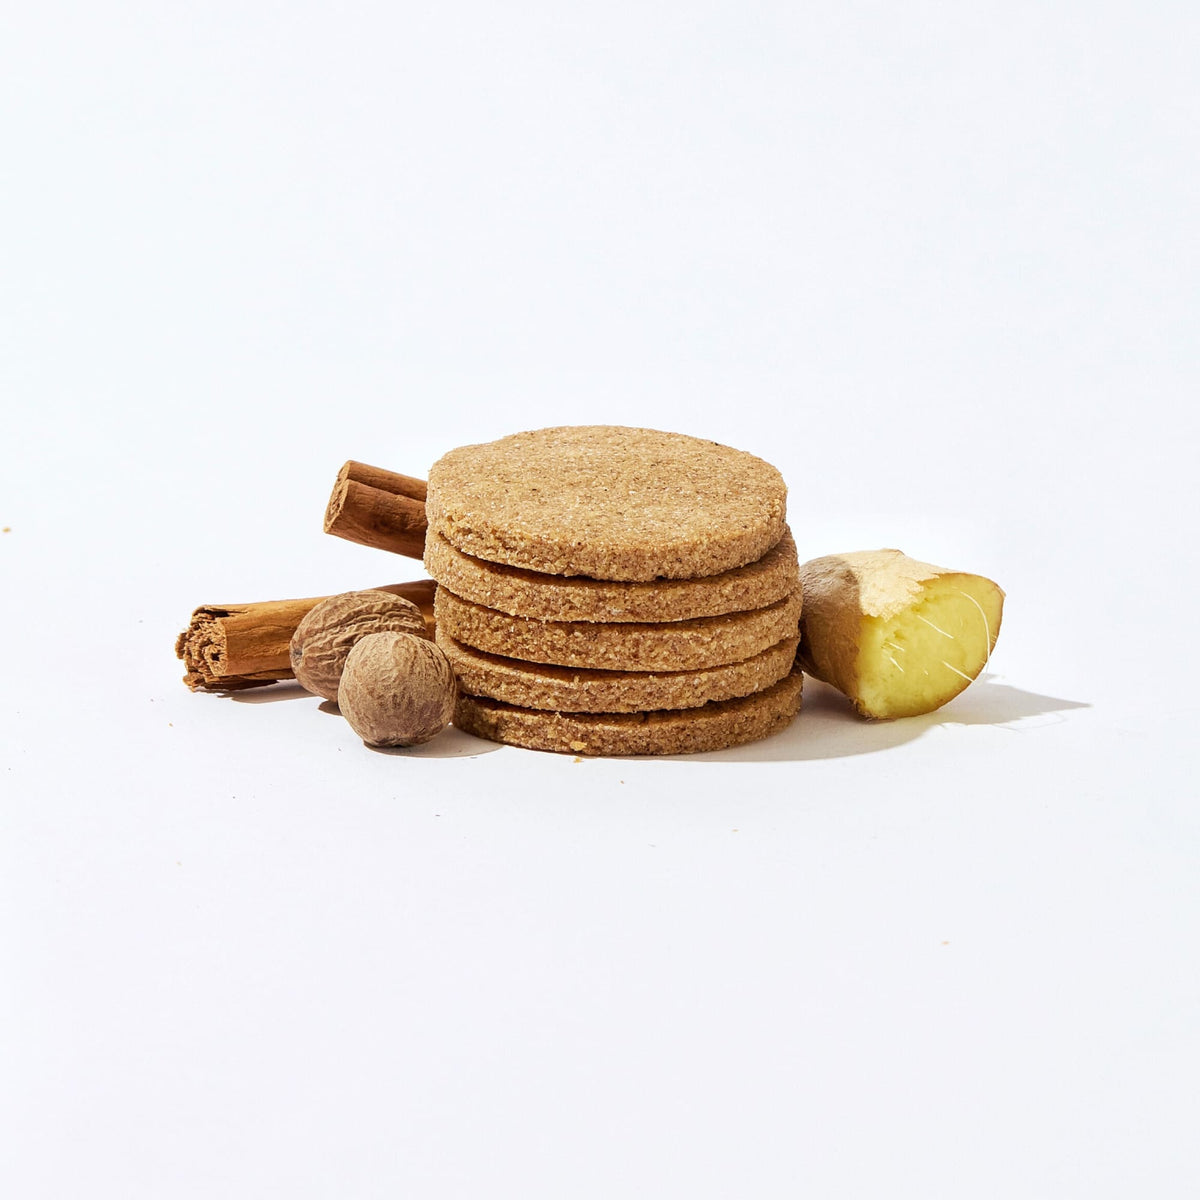 Spiced Biscuits with Cinnamon, Nutmeg and Ginger